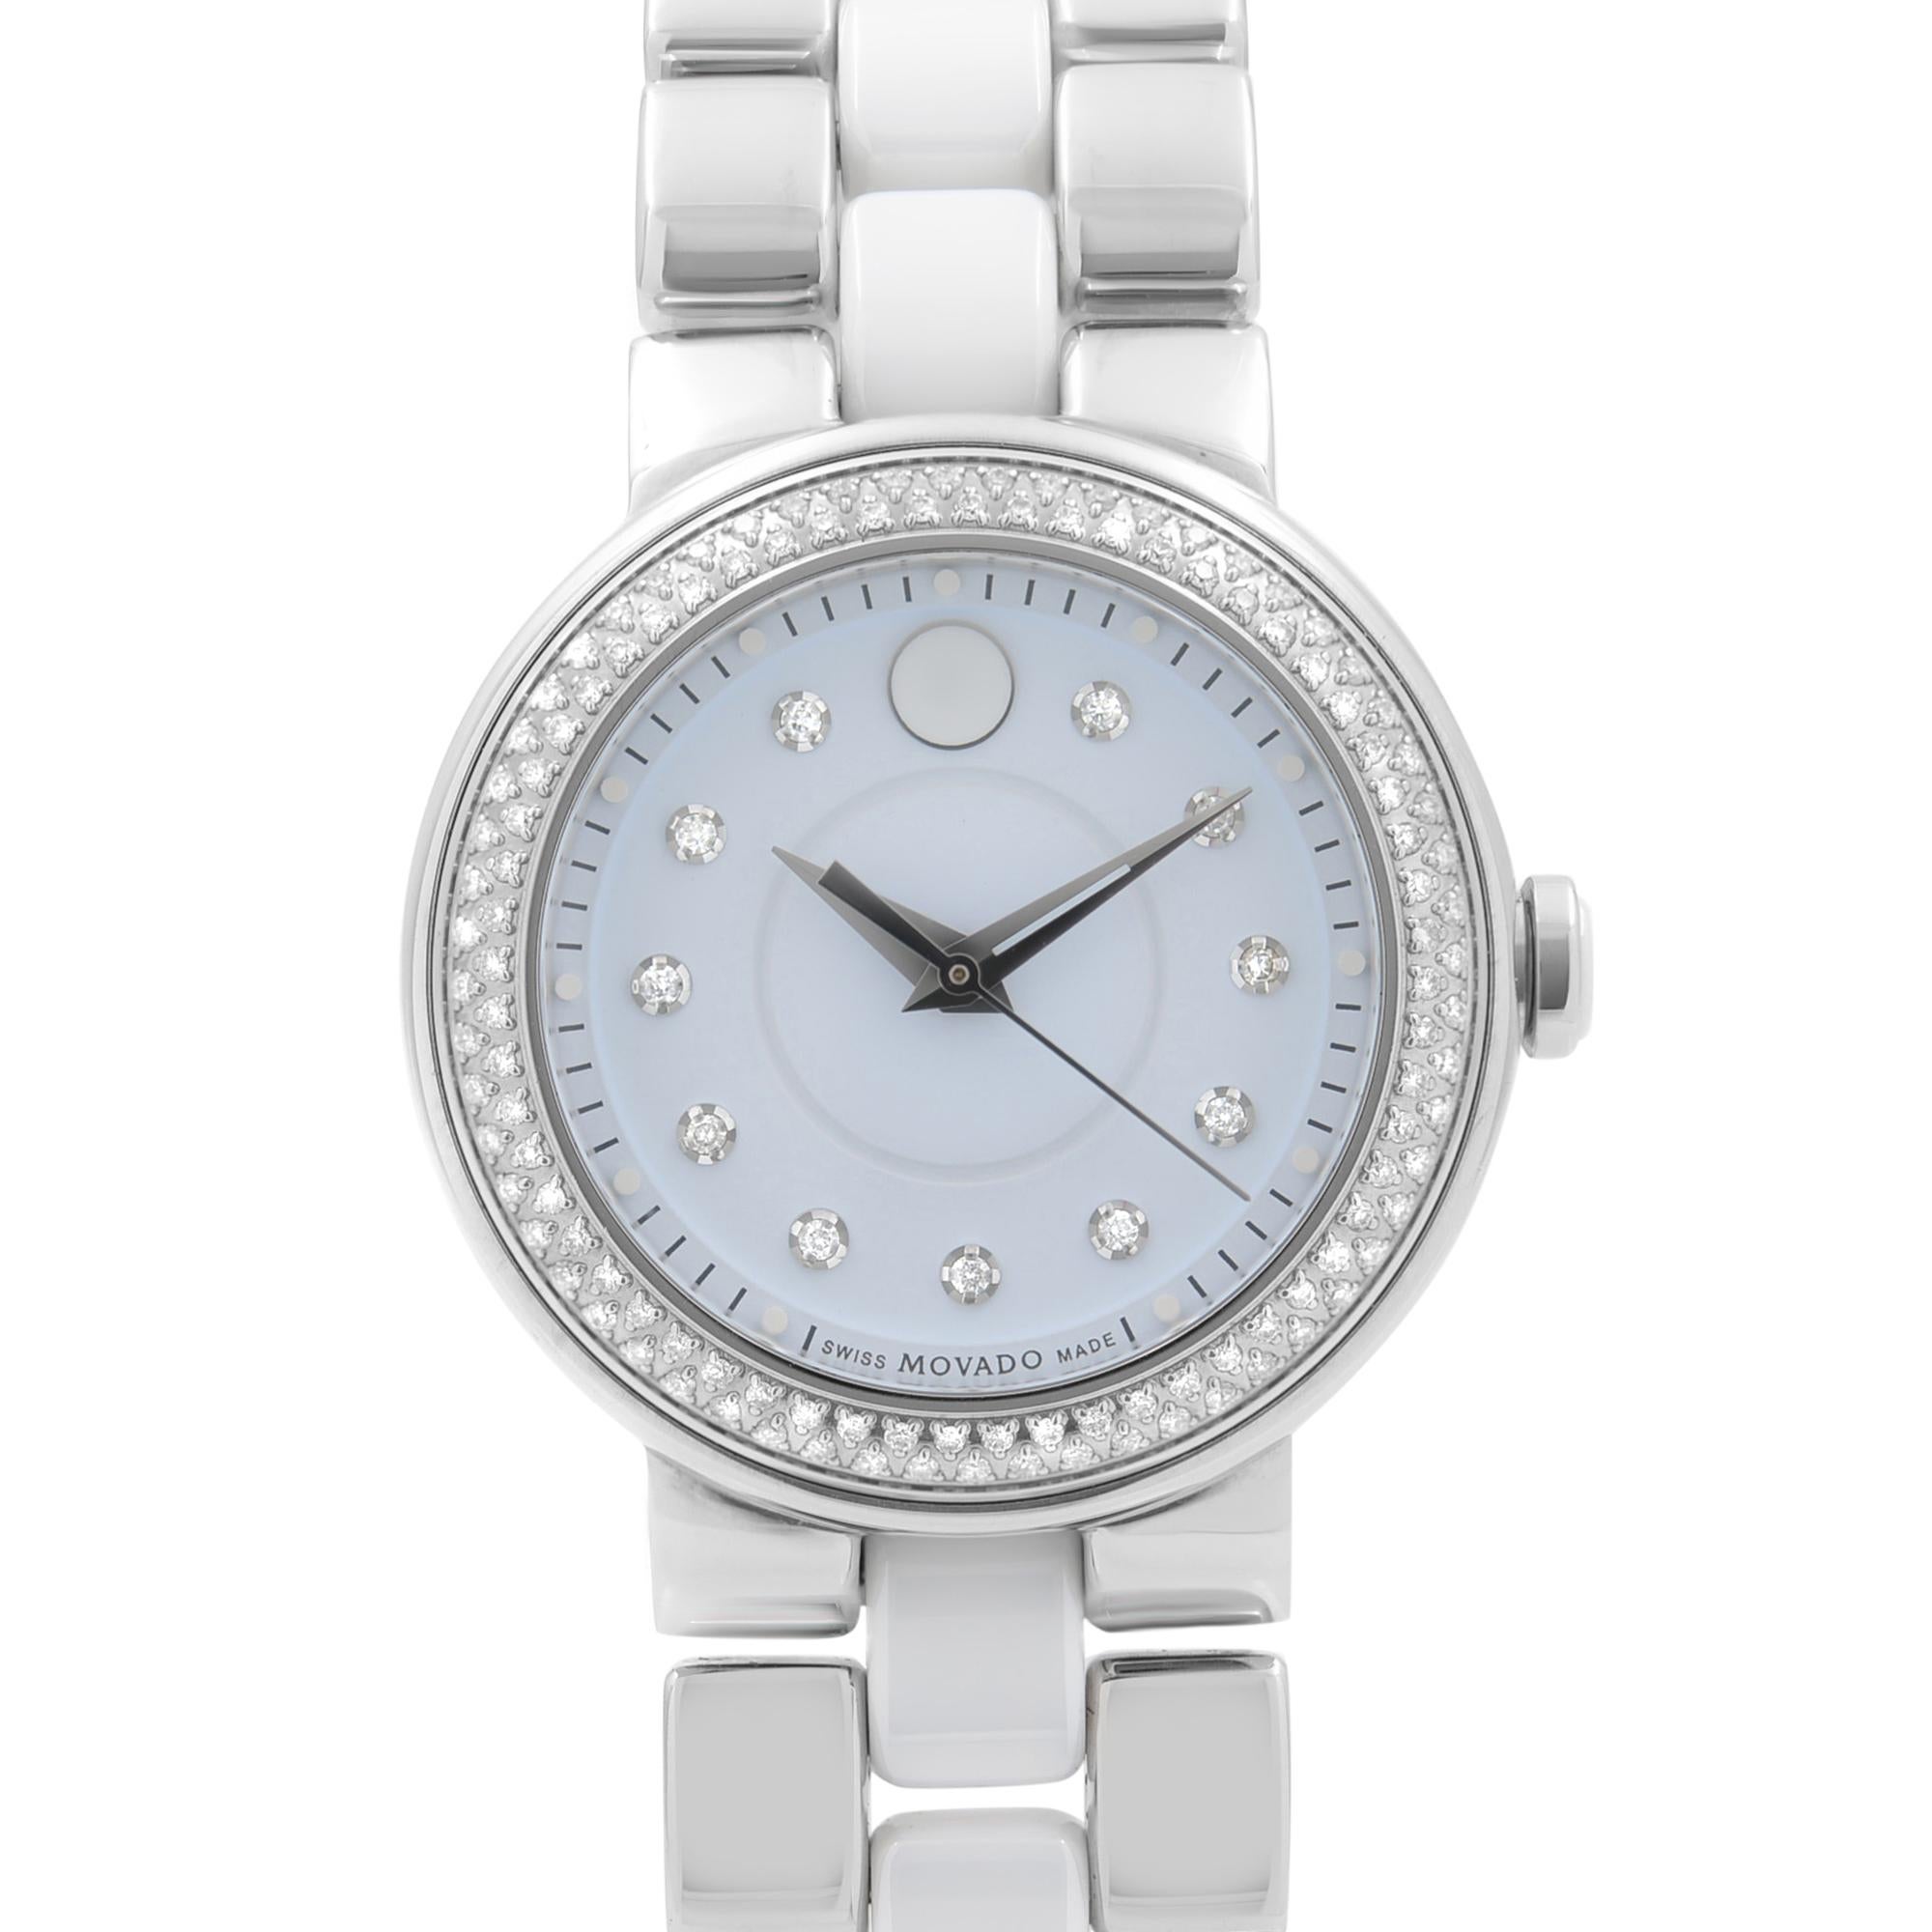 Great Pre-owned Condition Movado Cerena 28mm Steel White Ceramic Diamond Bezel Quartz Ladies Watch 0606931. The Back Case Has a Few Scratches. No Original Box and Papers are Included. Comes with a Chronostore presentation box and authenticity card.